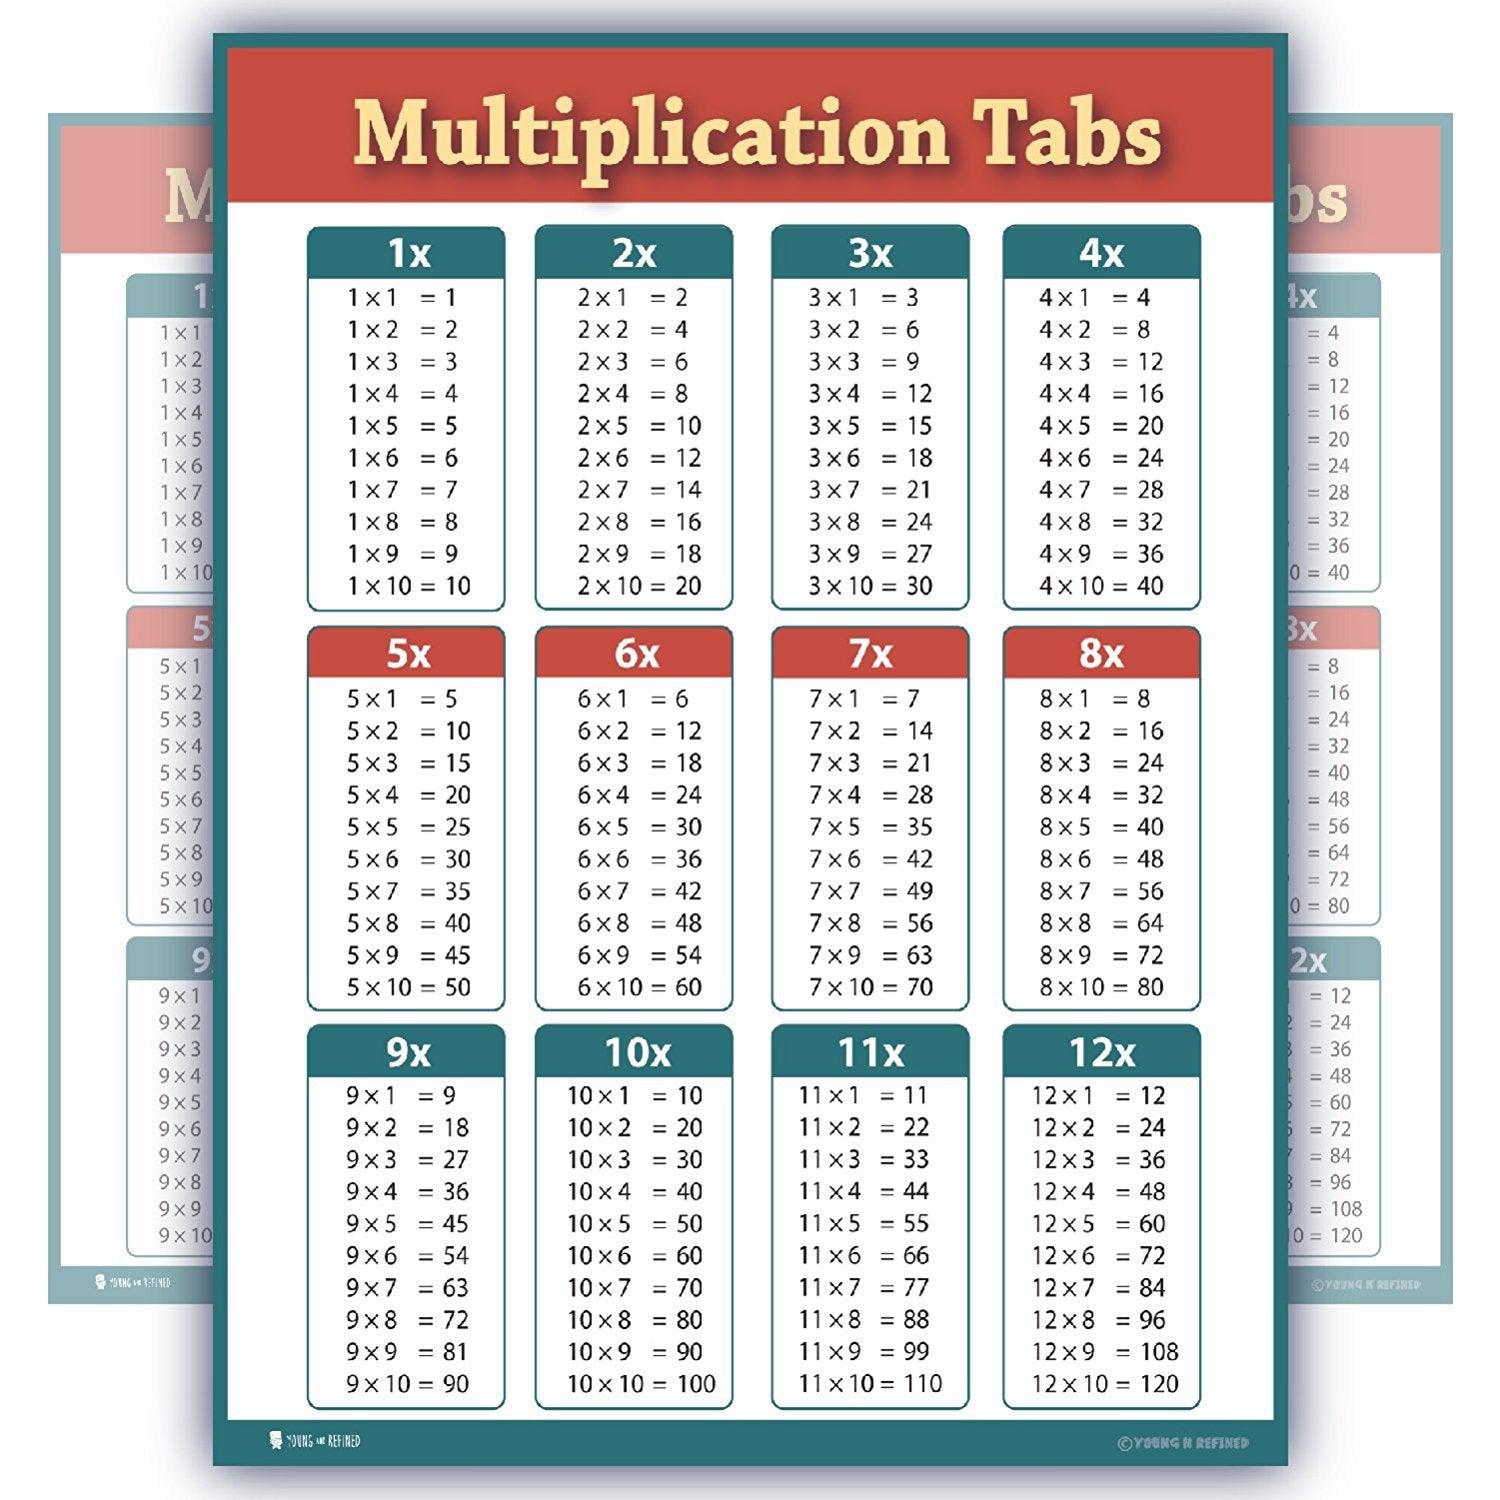 learning-multiplication-tables-chart-laminated-classroom-poster-young